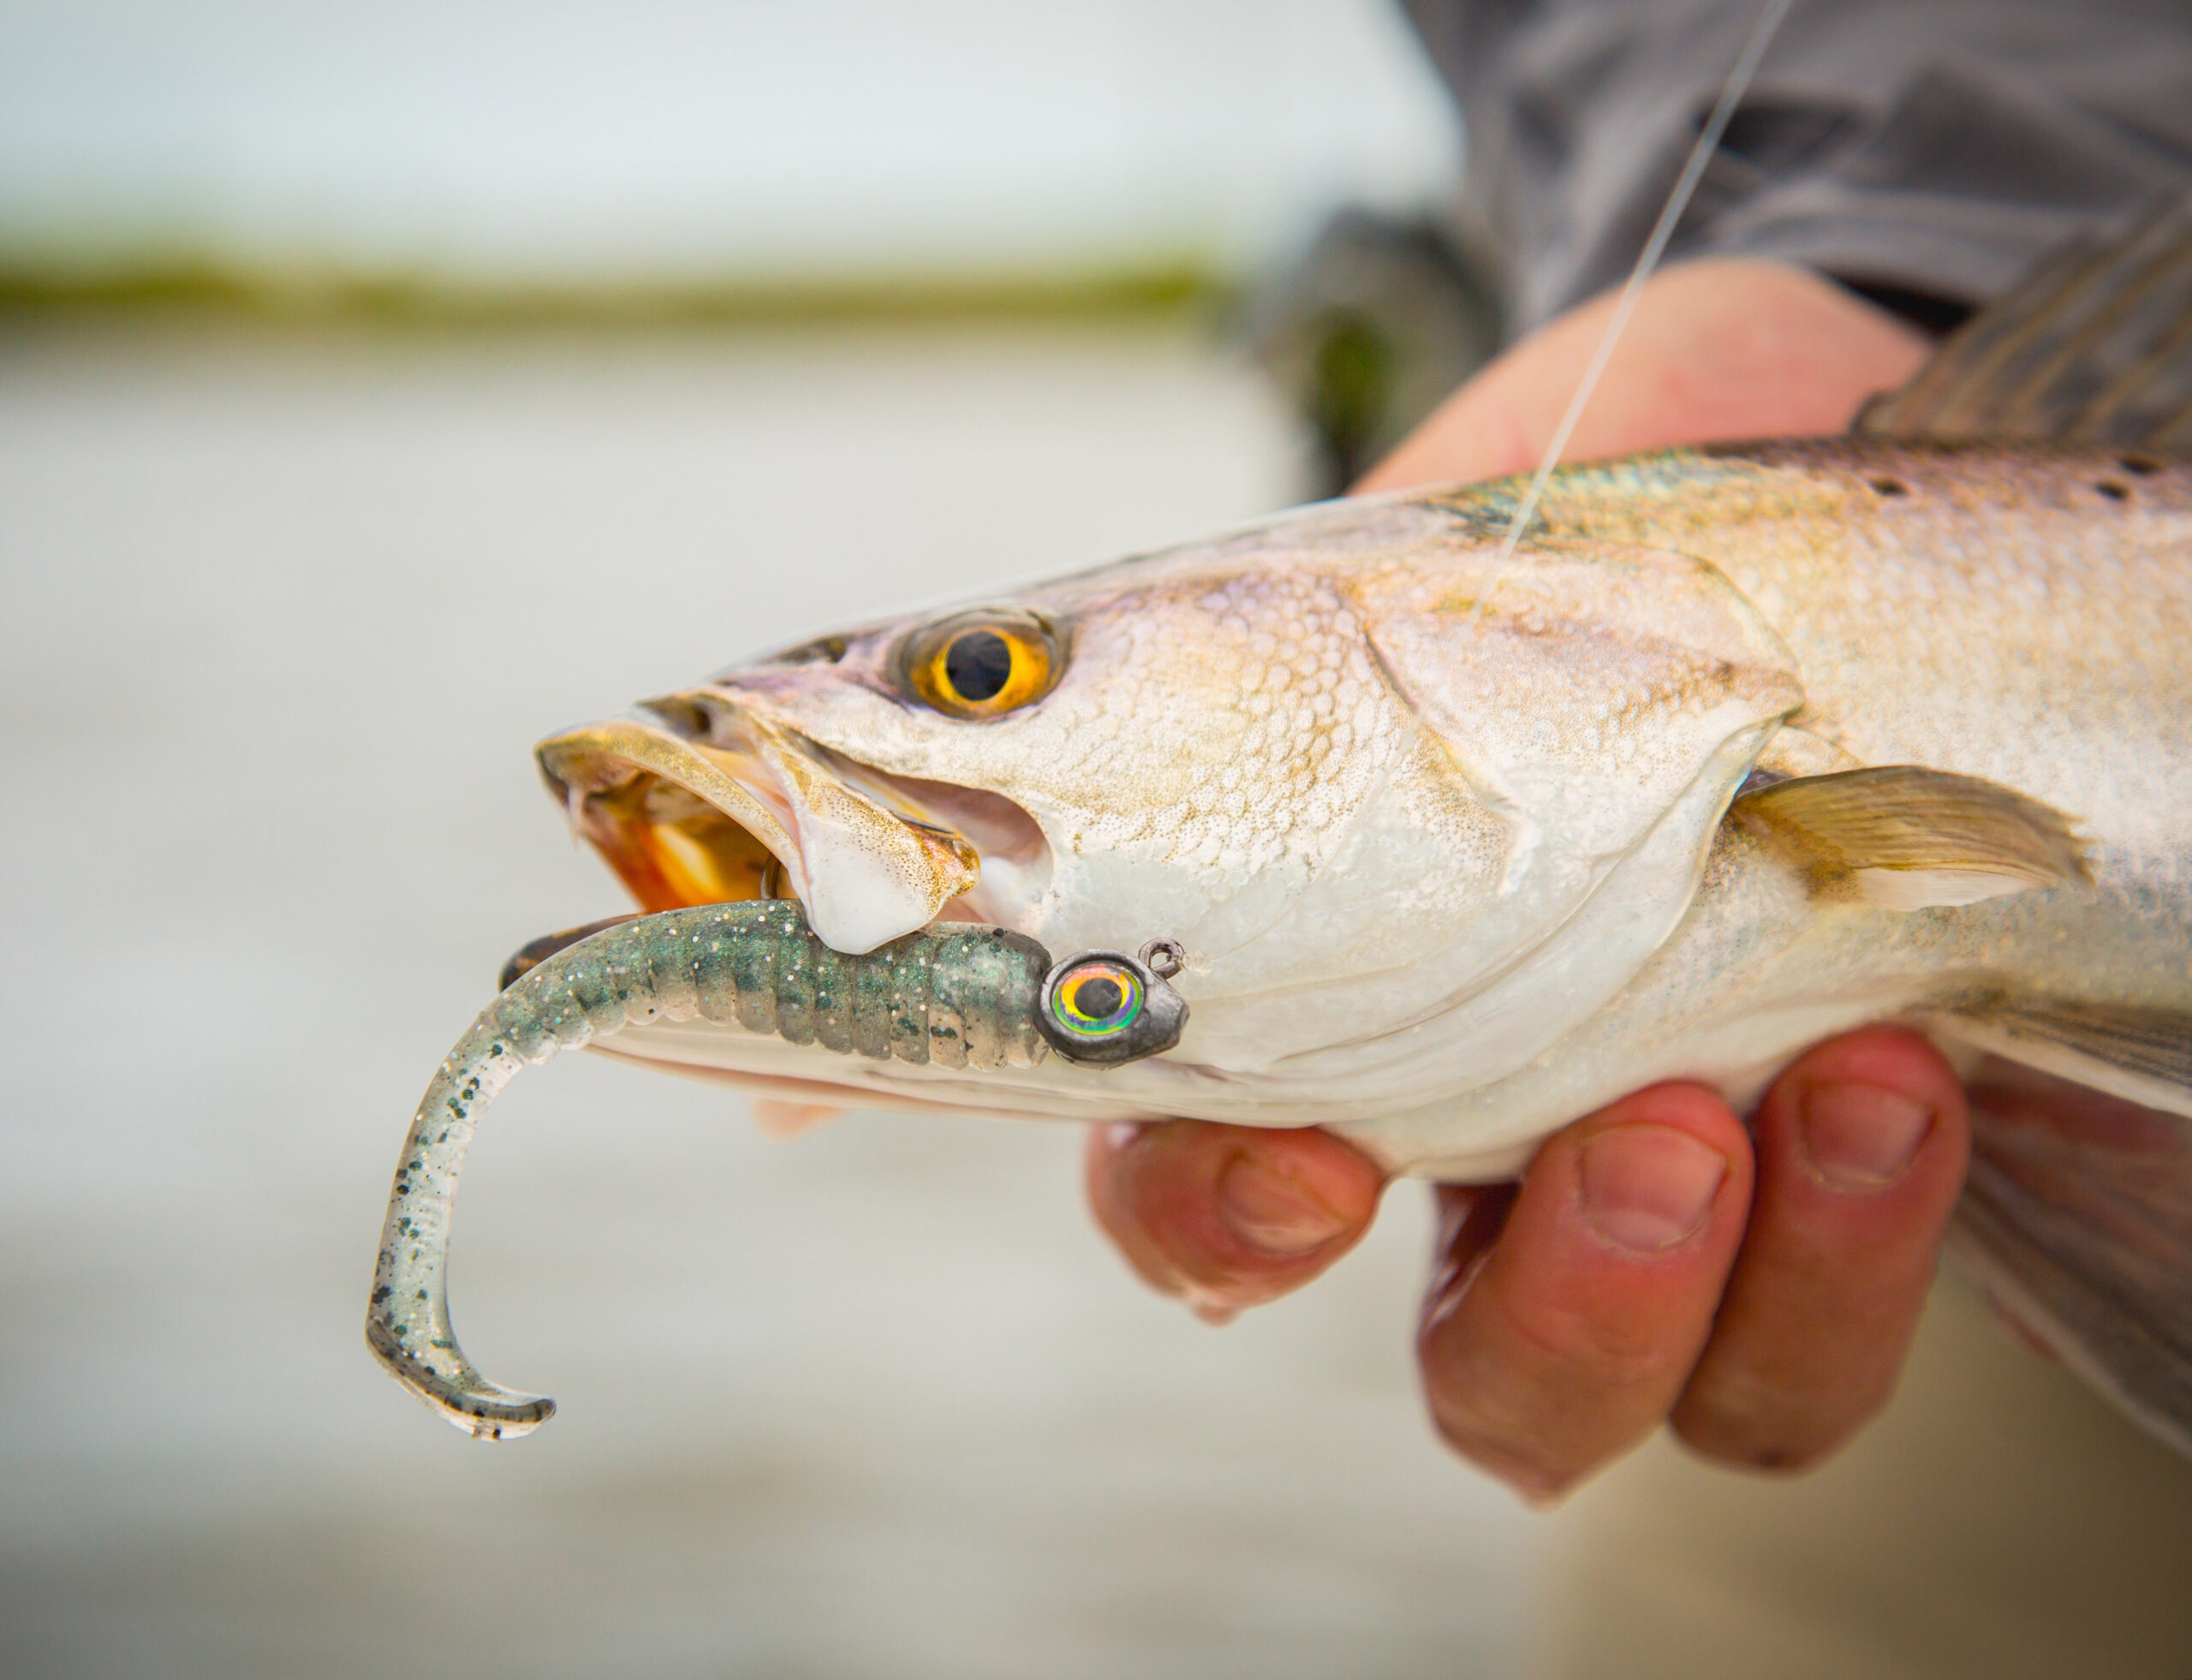 The Z-Man Trout Trick is one of the best speckled trout lures